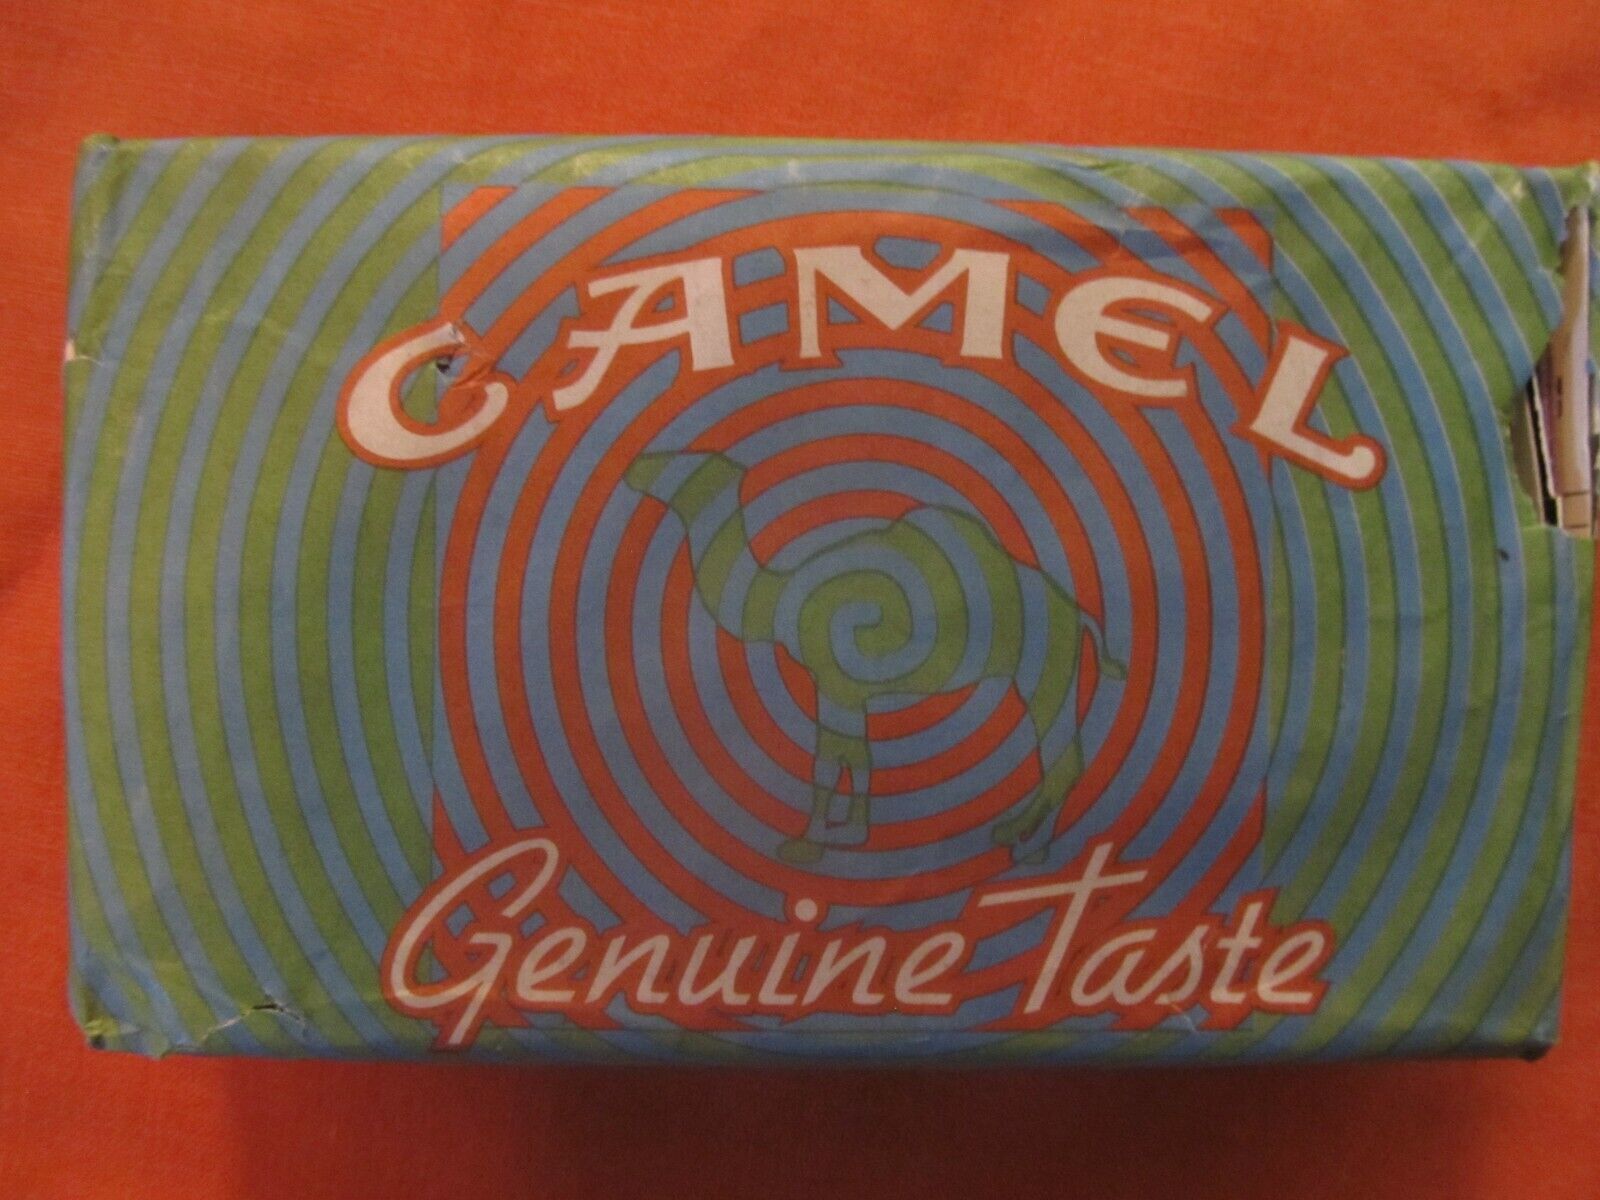 Camel Genuine Taste Matches 50 books New Old Stock, DATED 1995